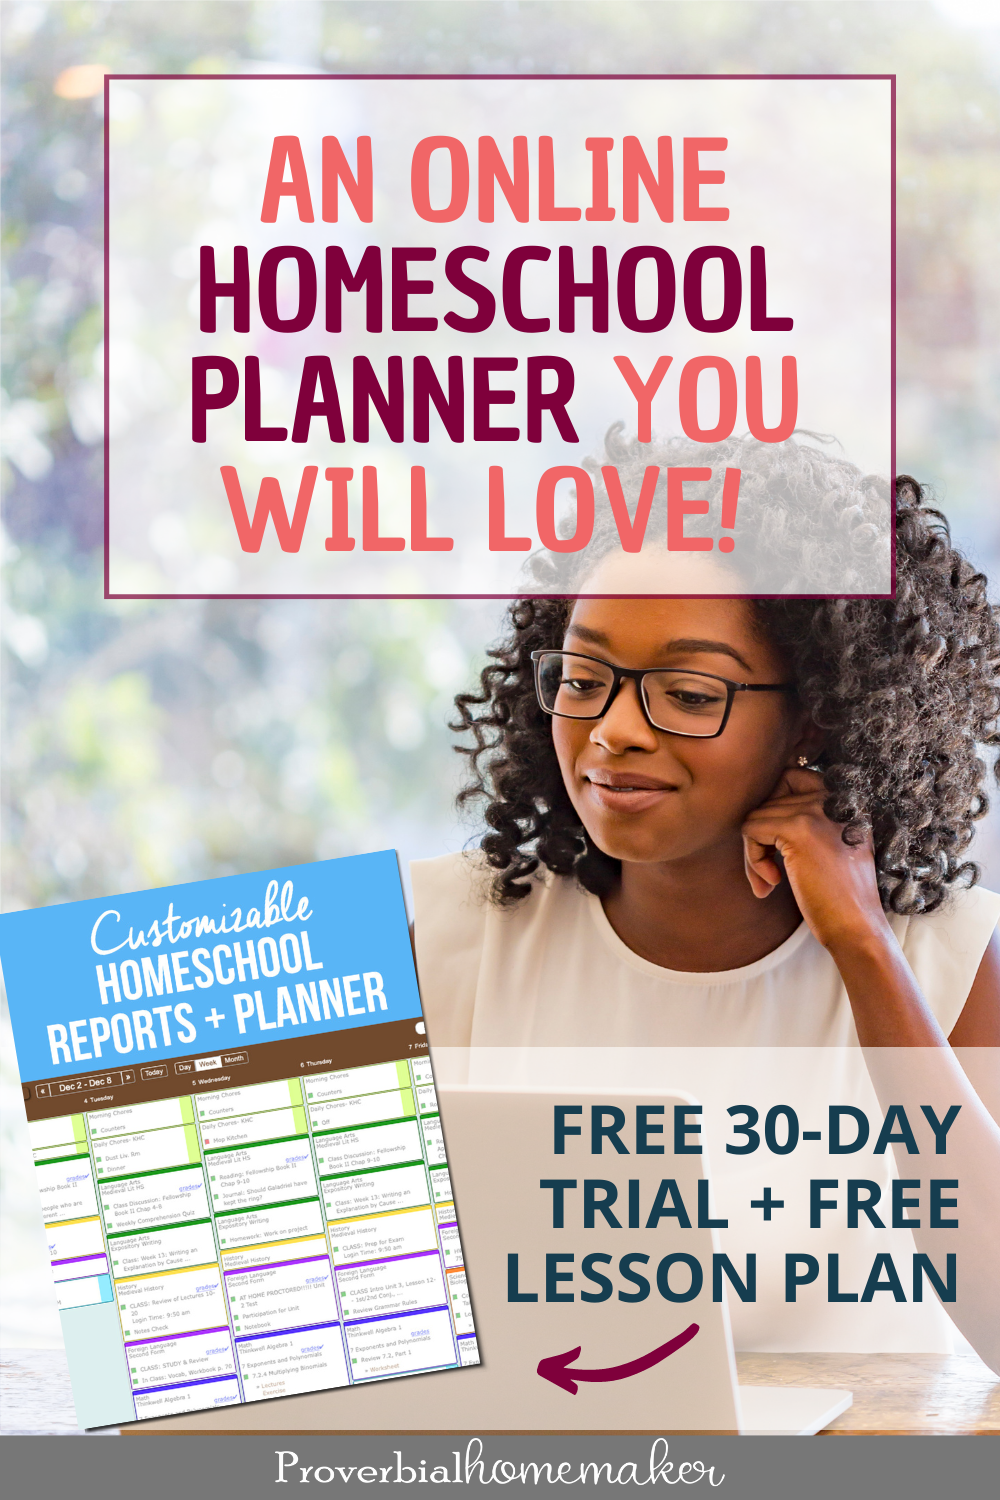 Homeschool Planet is a flexible, easy-to-use online homeschool planner that helps you get organized! FREE 30-day trial.